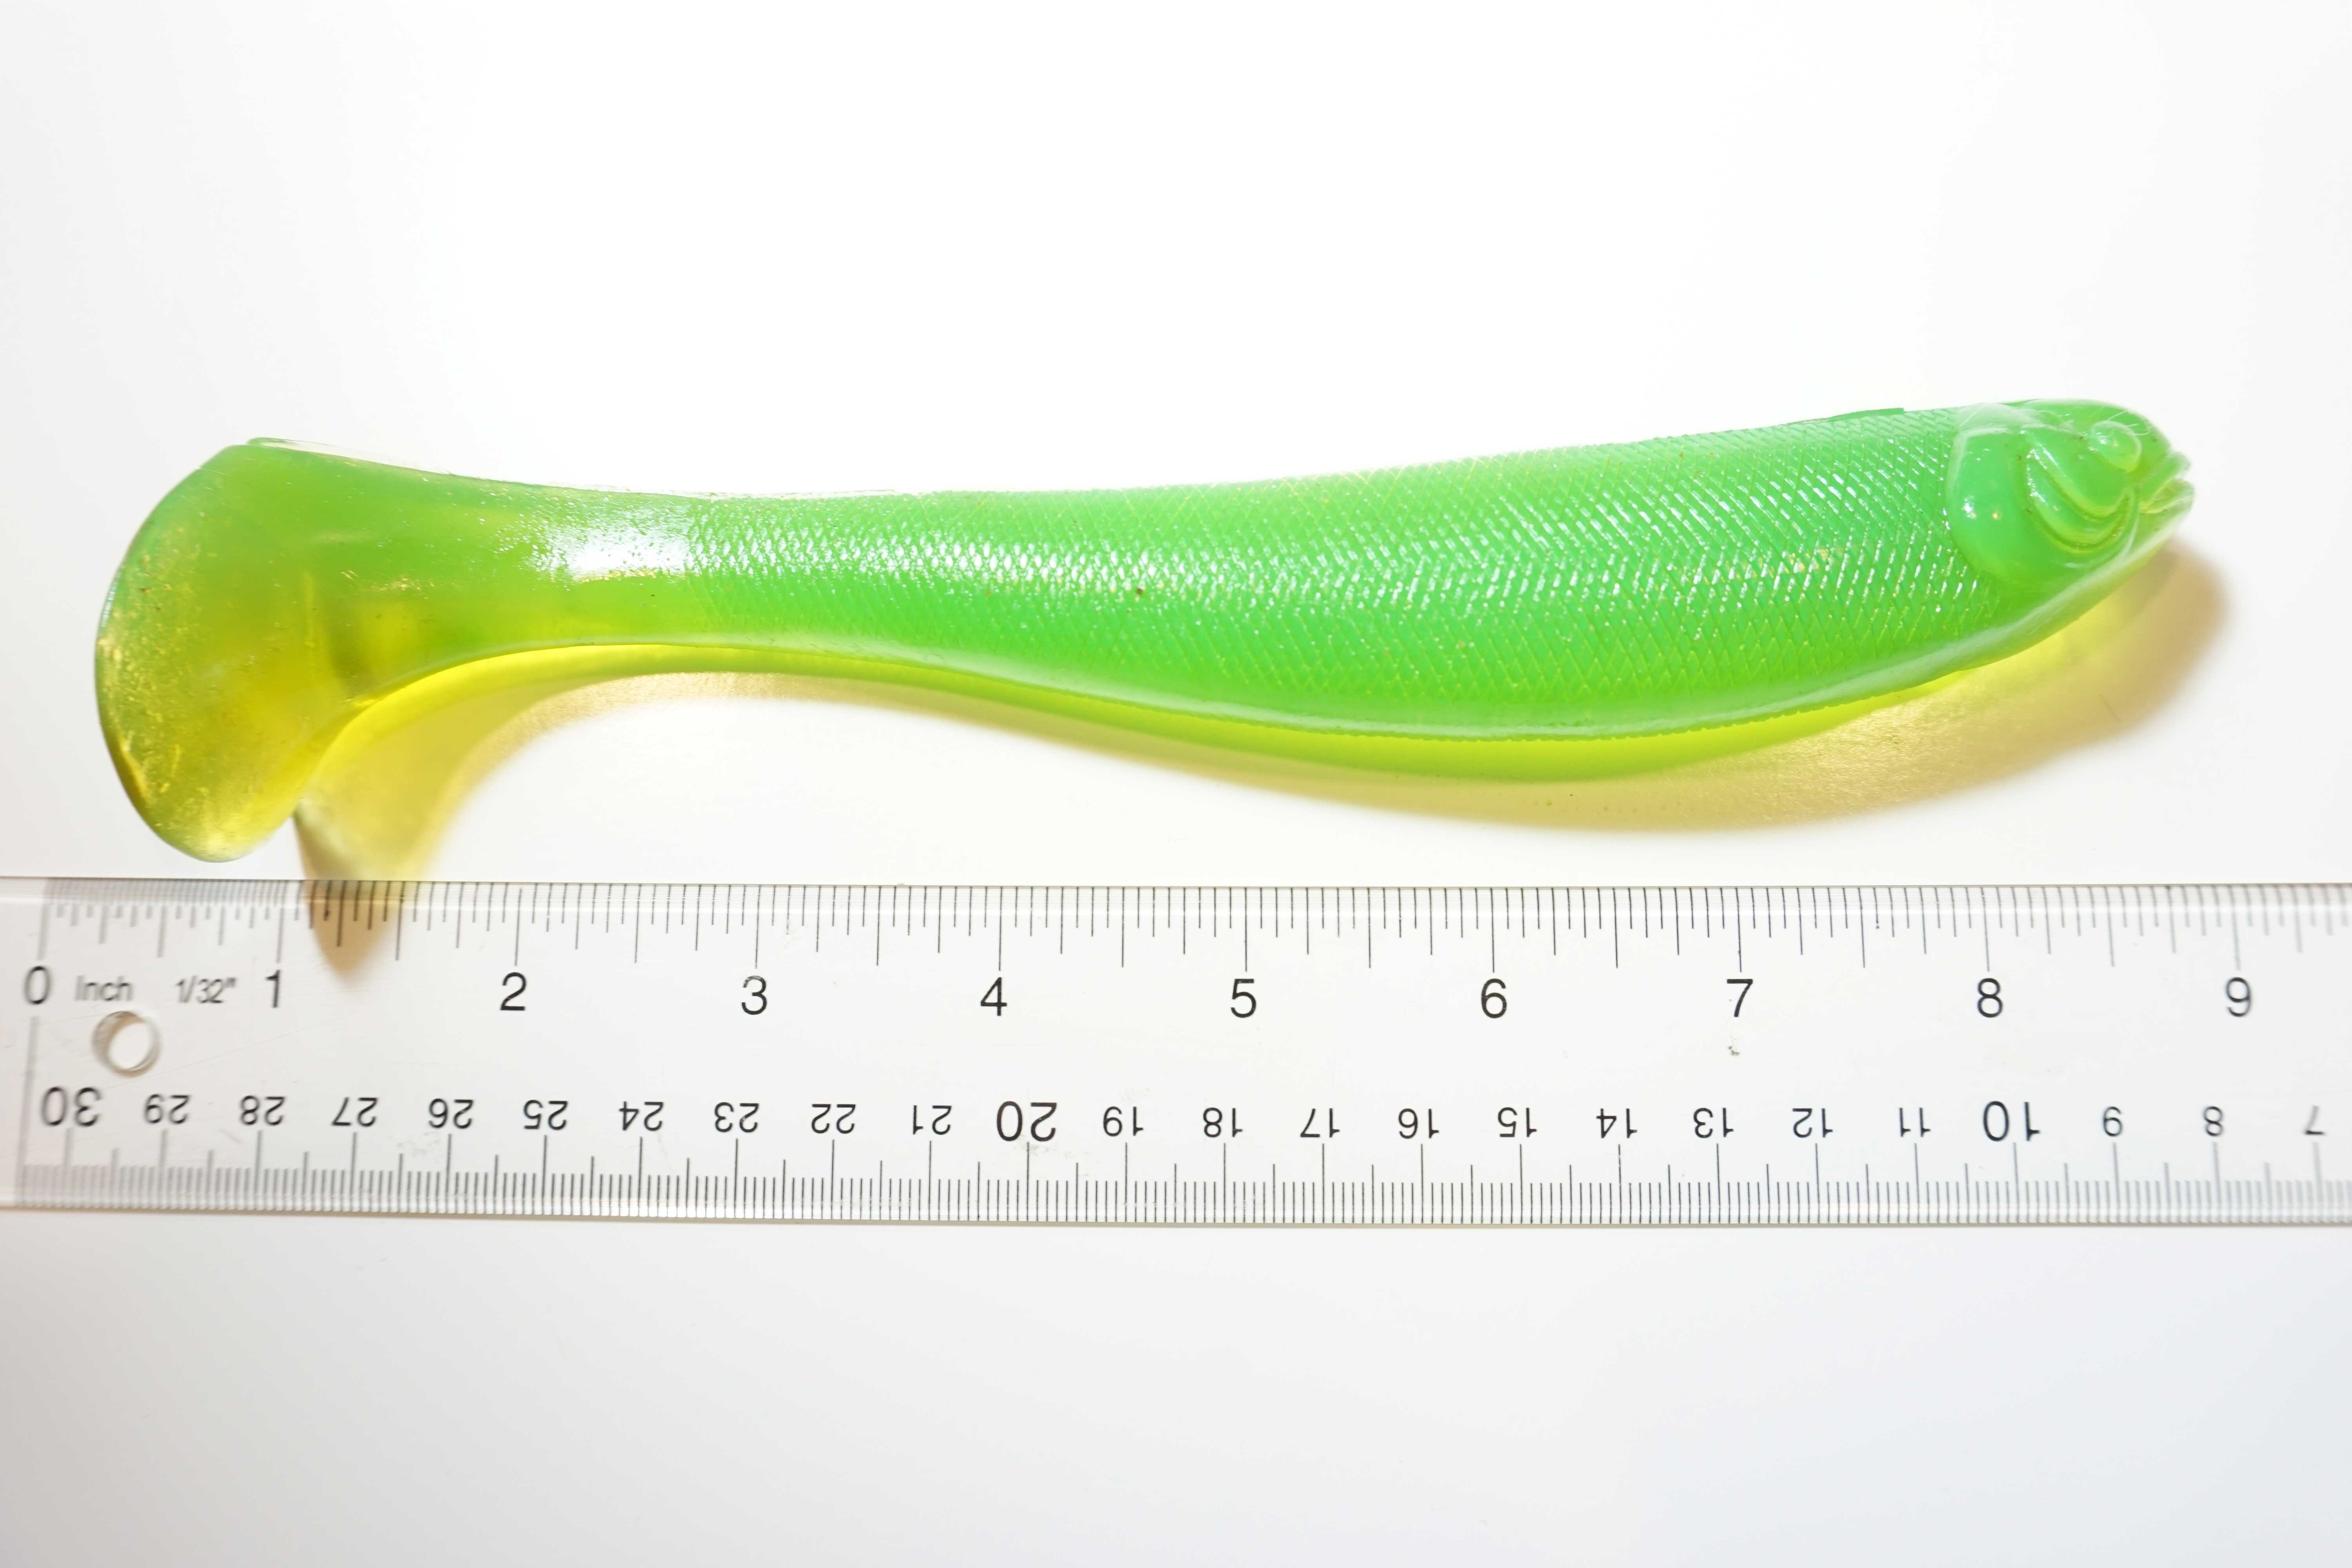 Soft Paddle Tail Shad Translucent Lime Green 8" - Click Image to Close